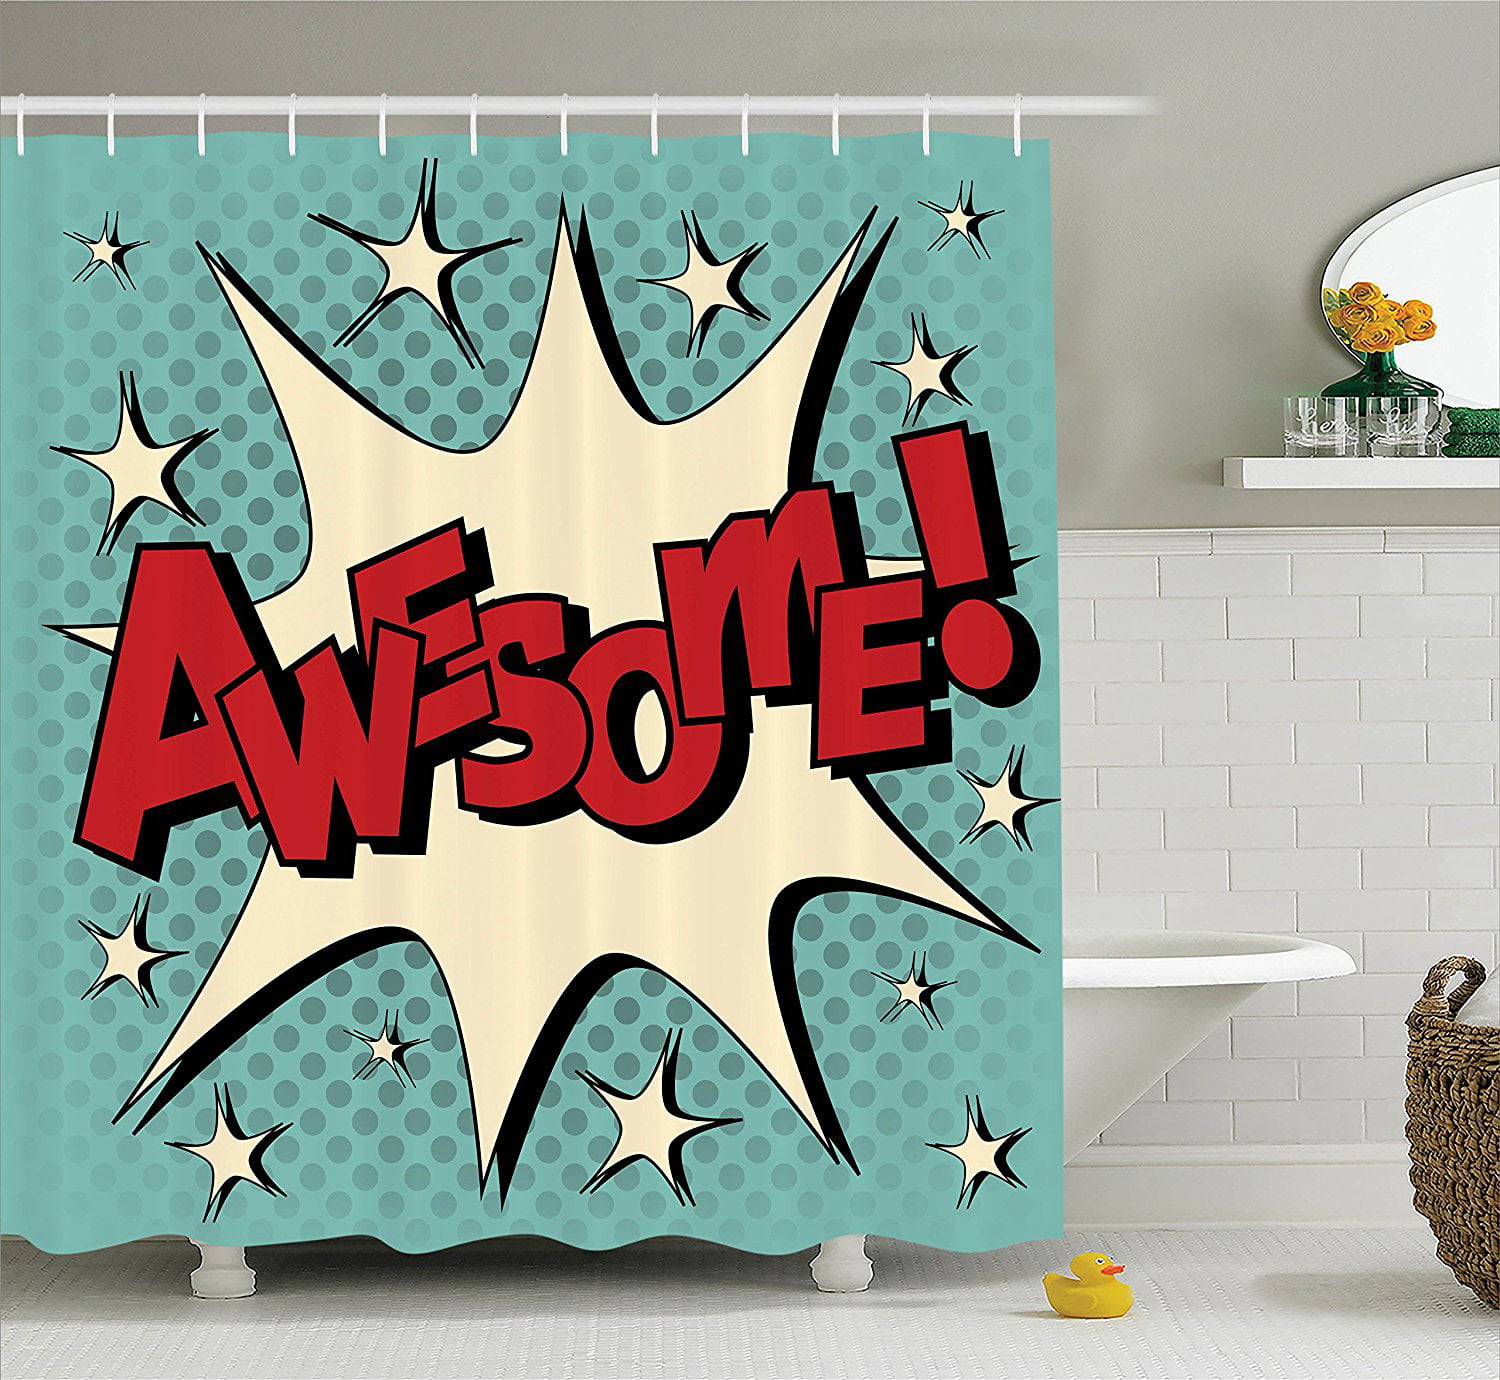 Comic Bubble in Pop Art Style with Awesome and All Star Icon Humor Cartoon 60x72 inches Extra Long Polyester Fabric Bathroom Shower Curtain Vintage Decor Collection Yellow Red Blue 